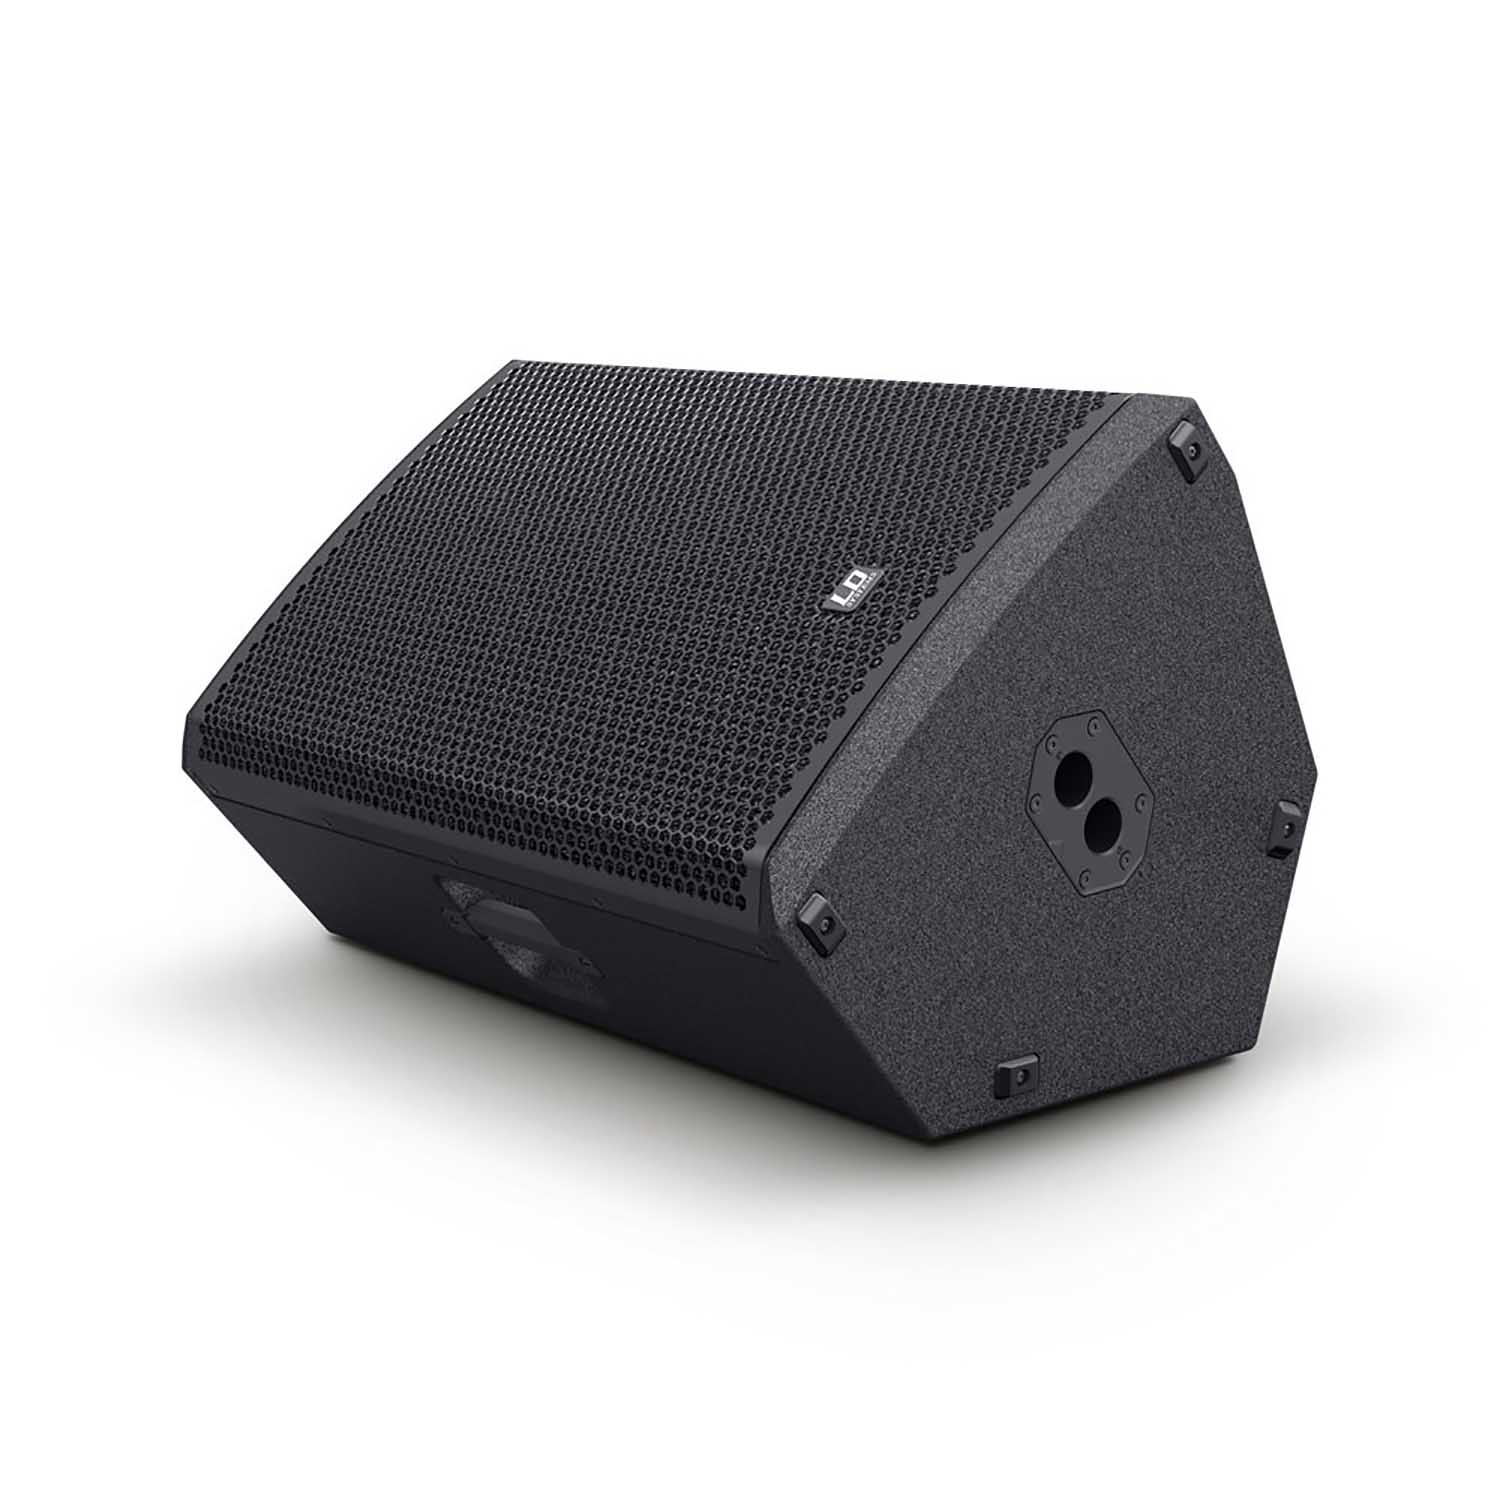 LD Systems STINGER 15 A G3, 15 Inches Active 2 Way Bass-Reflex PA Speaker LD Systems